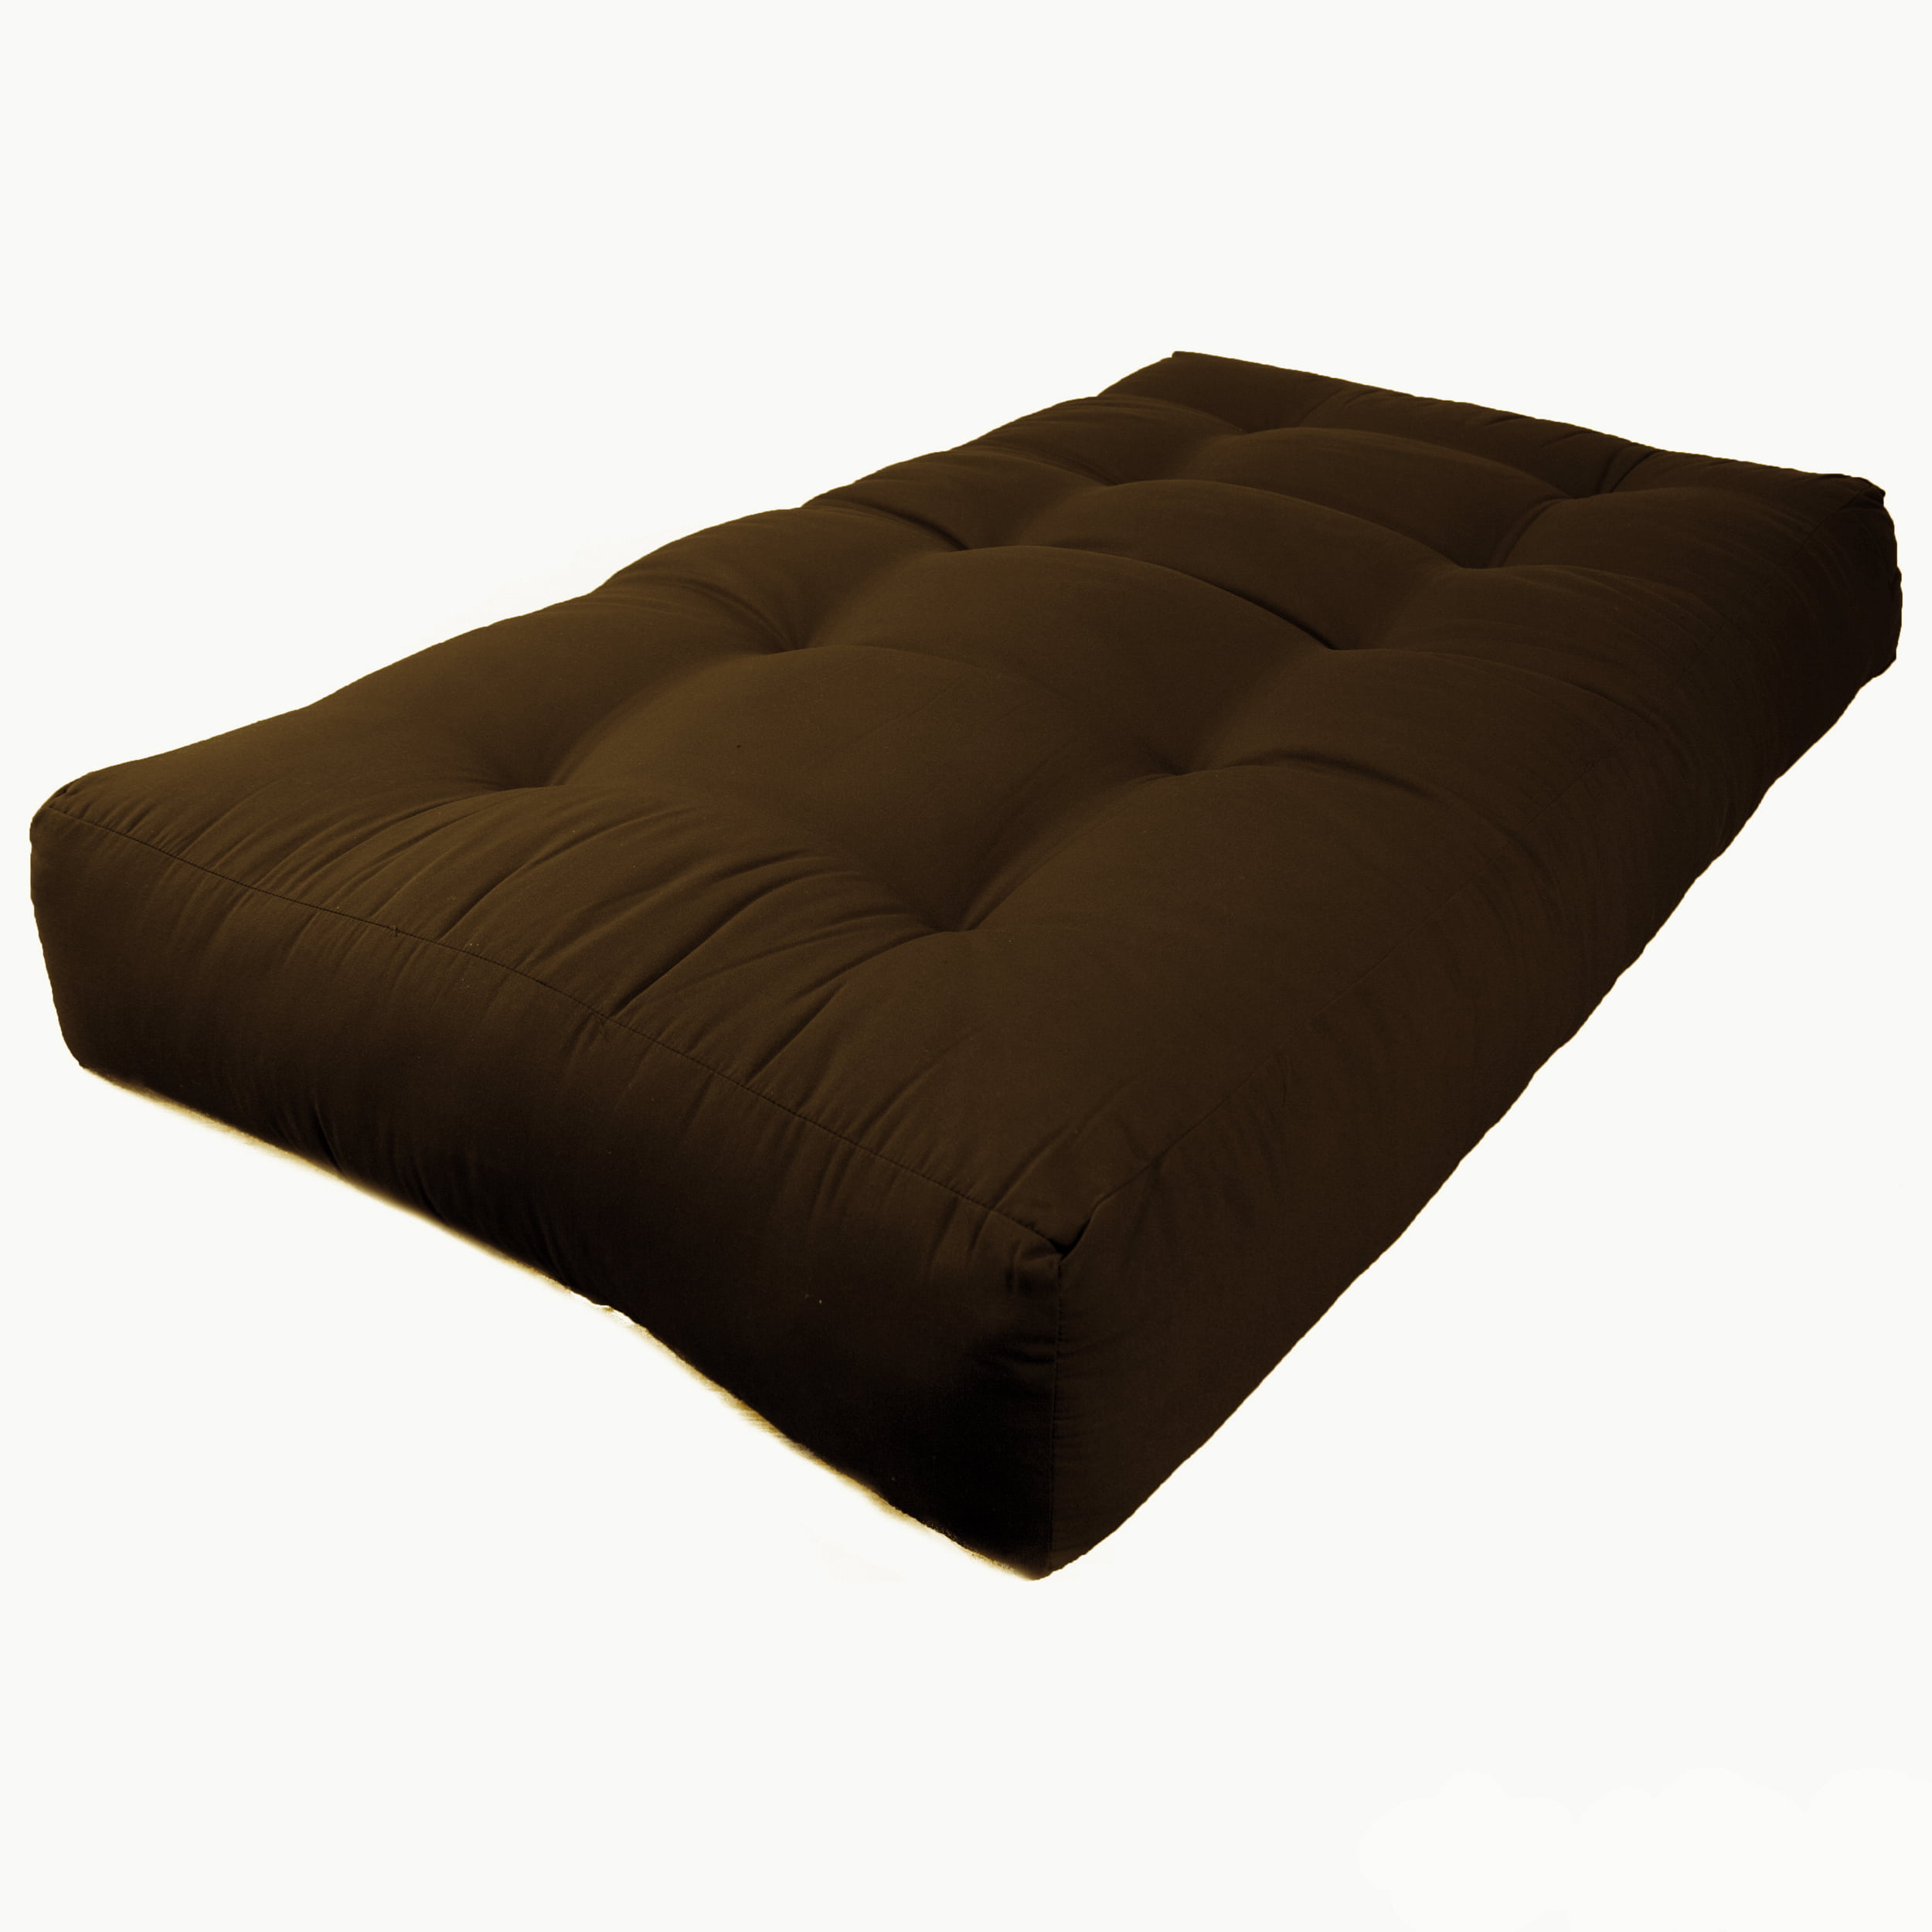 Picture of Blazing Needles 9603-TW-CH 10 in. Renewal Twill Twin Size Futon Mattress, Chocolate